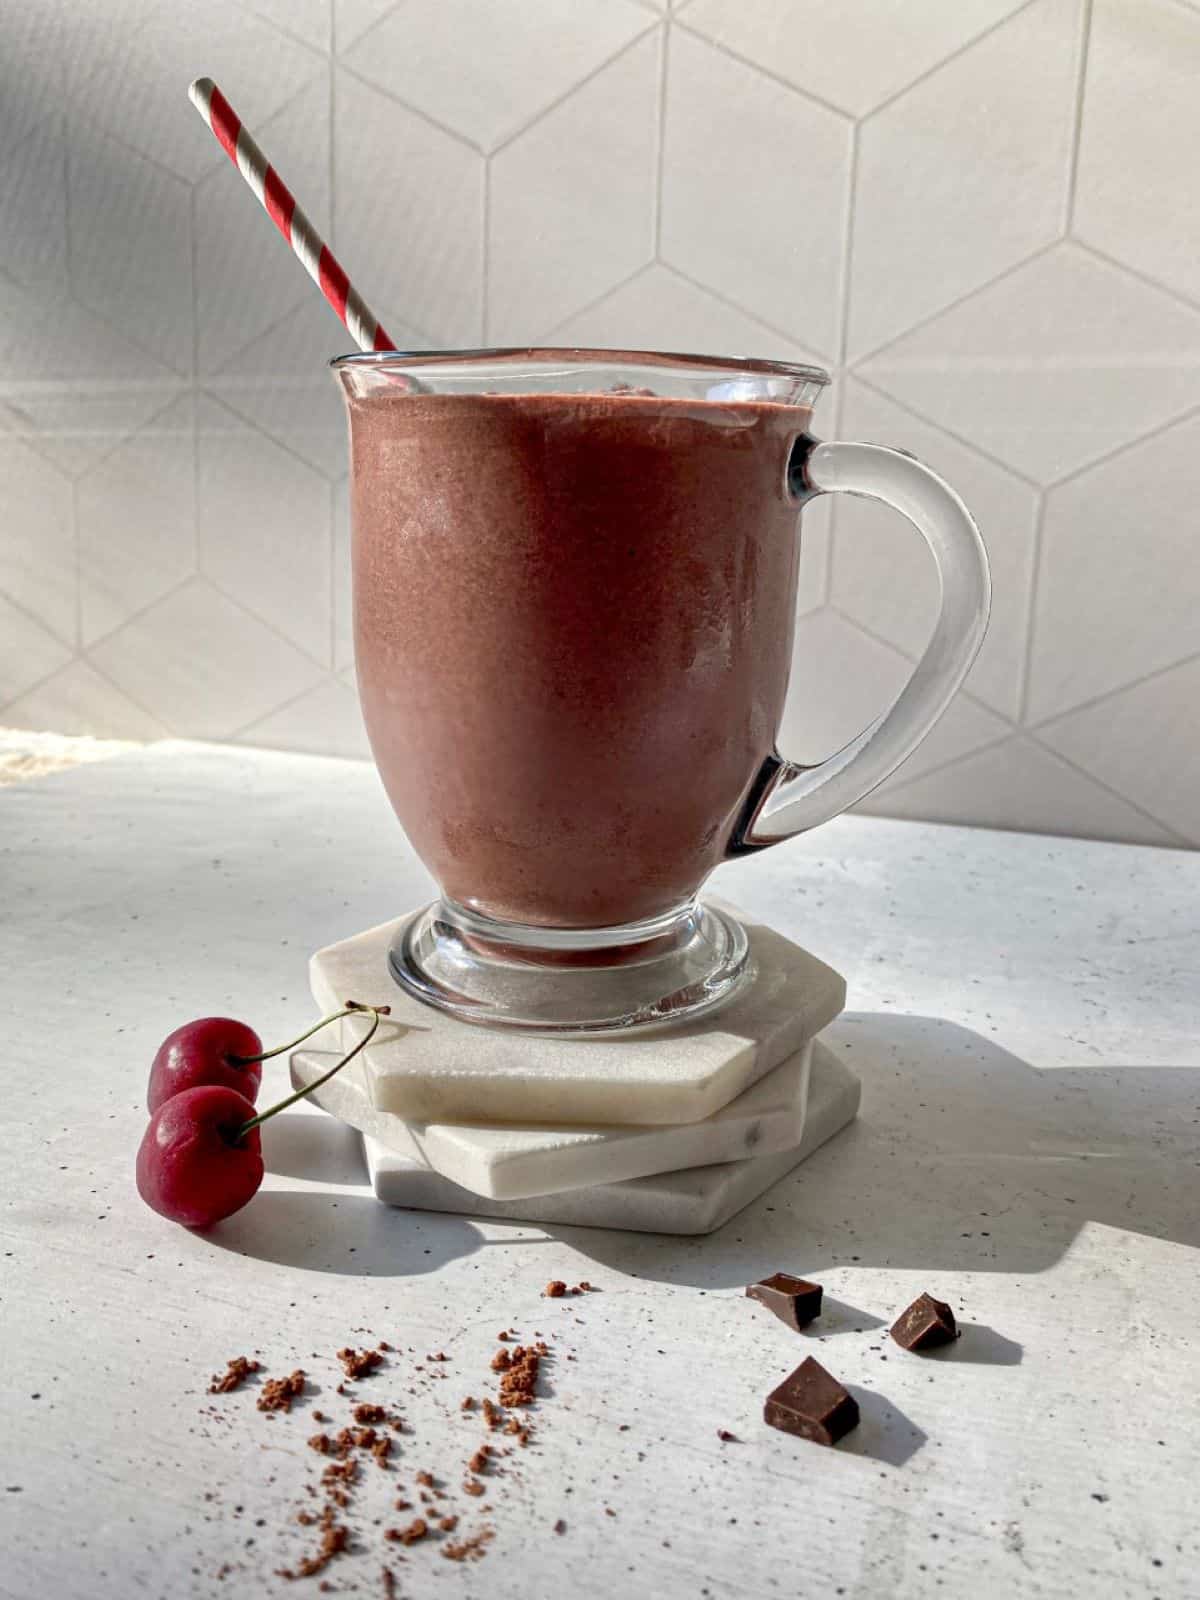 Chocolate Cherry Smoothie with Cacao in a glass with a straw. Cherries, a dusting of cacao powder, and chocolate chucks are around the glass.